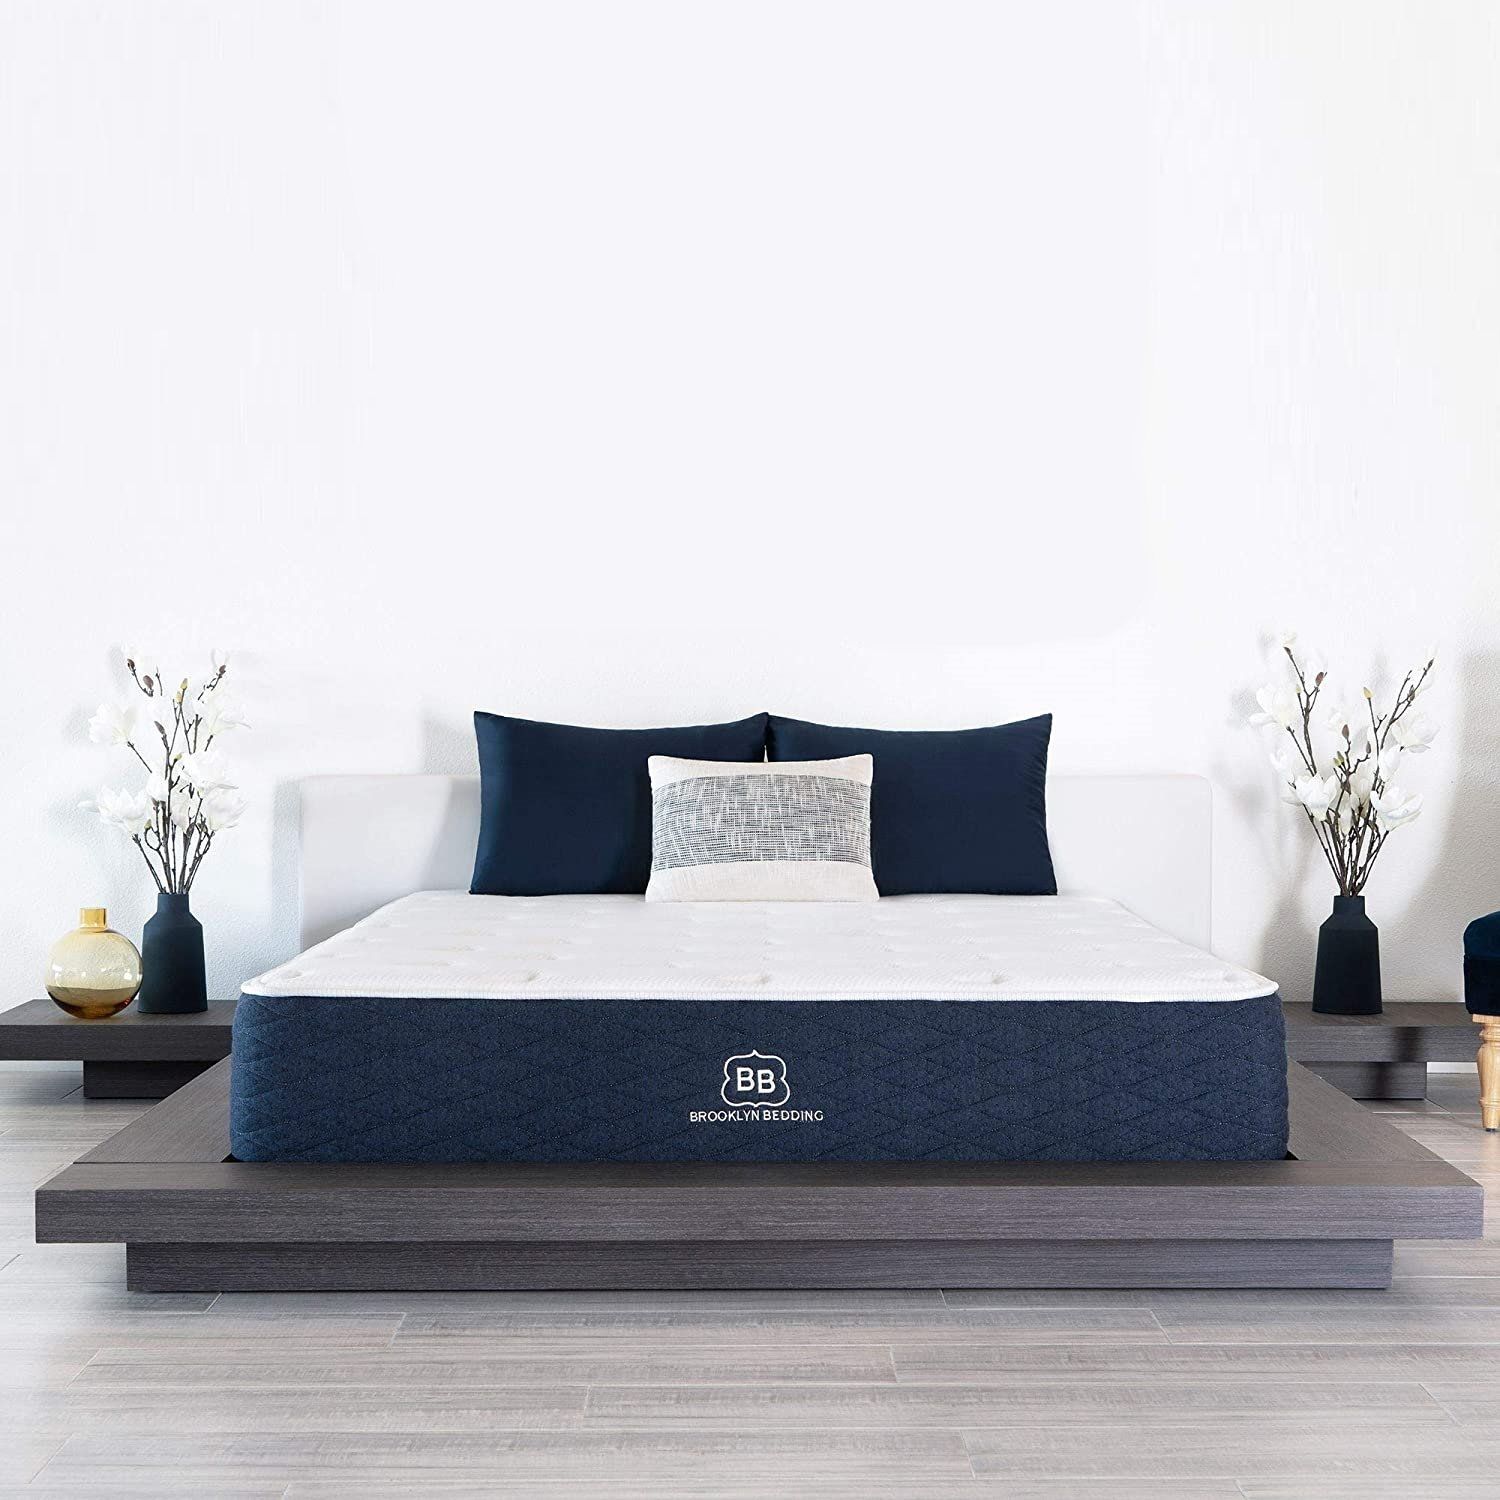 Teachers get a discount at Brooklyn Bedding on mattresses, pillows, sheets, and more! Get full details at MyEducationDiscount.com